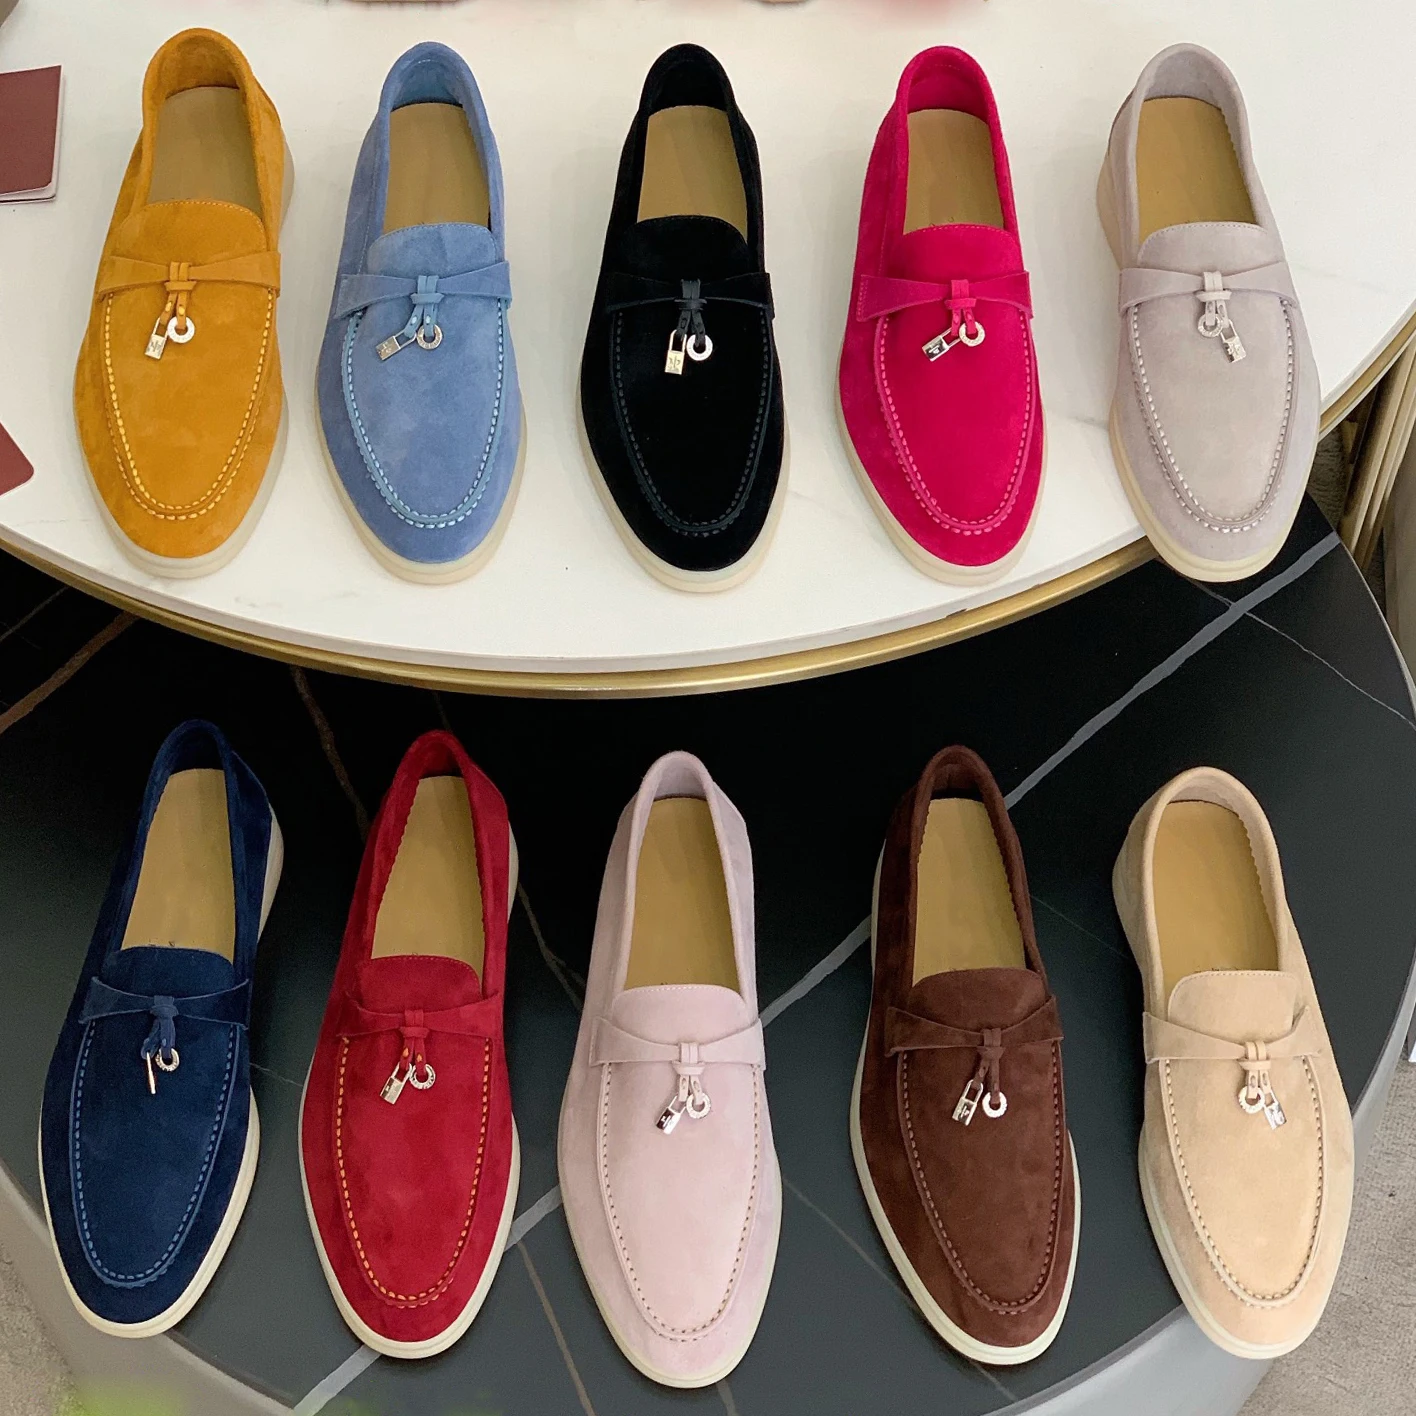 

2022 Mmtal Lock Beanie Shoes Comfortable Soft Sole Flat Shoes Plus Size Summer Walk Shoes Women Loafers Suede Causal Moccasin